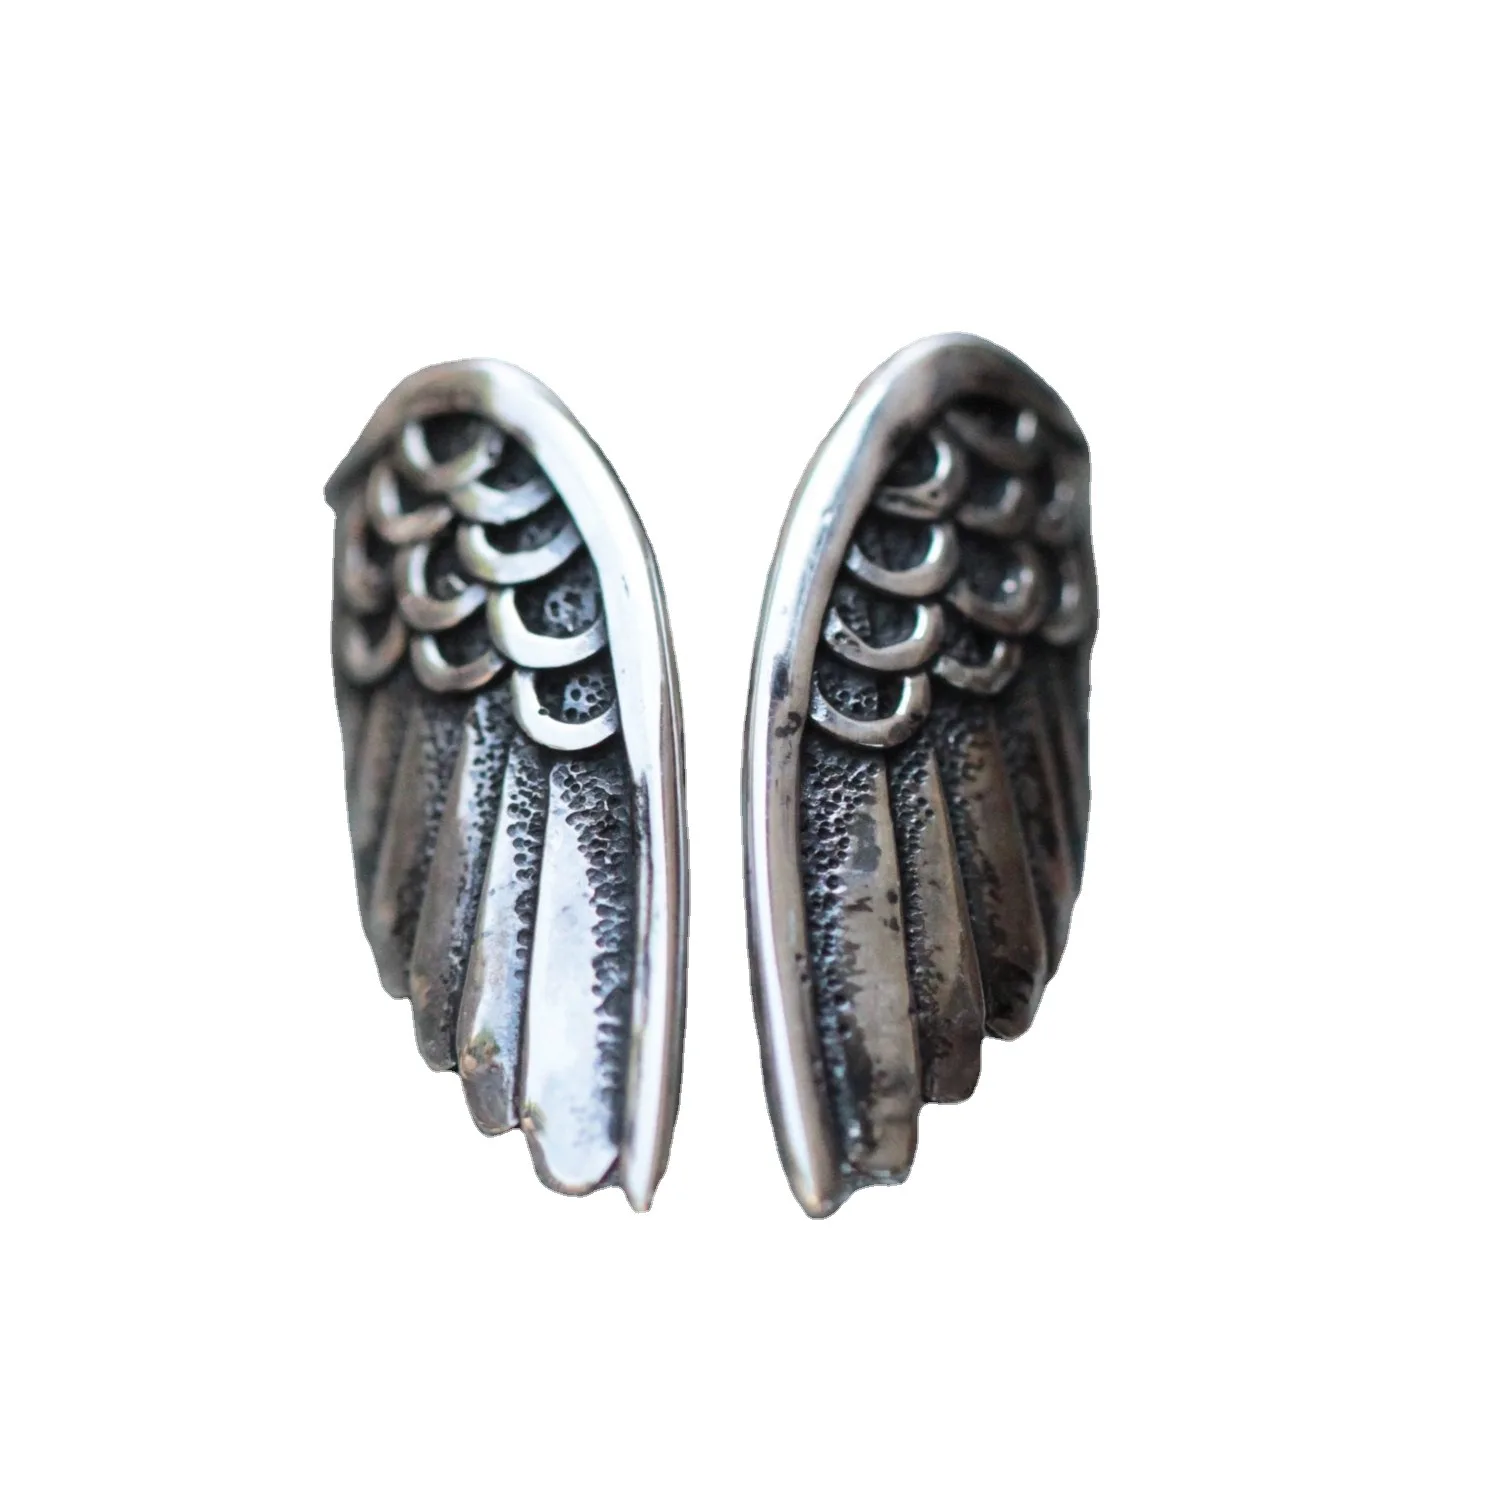 

retro angel wings hard alloy men's ring classic punk style jewelry accessories adjustable size jewlery for women